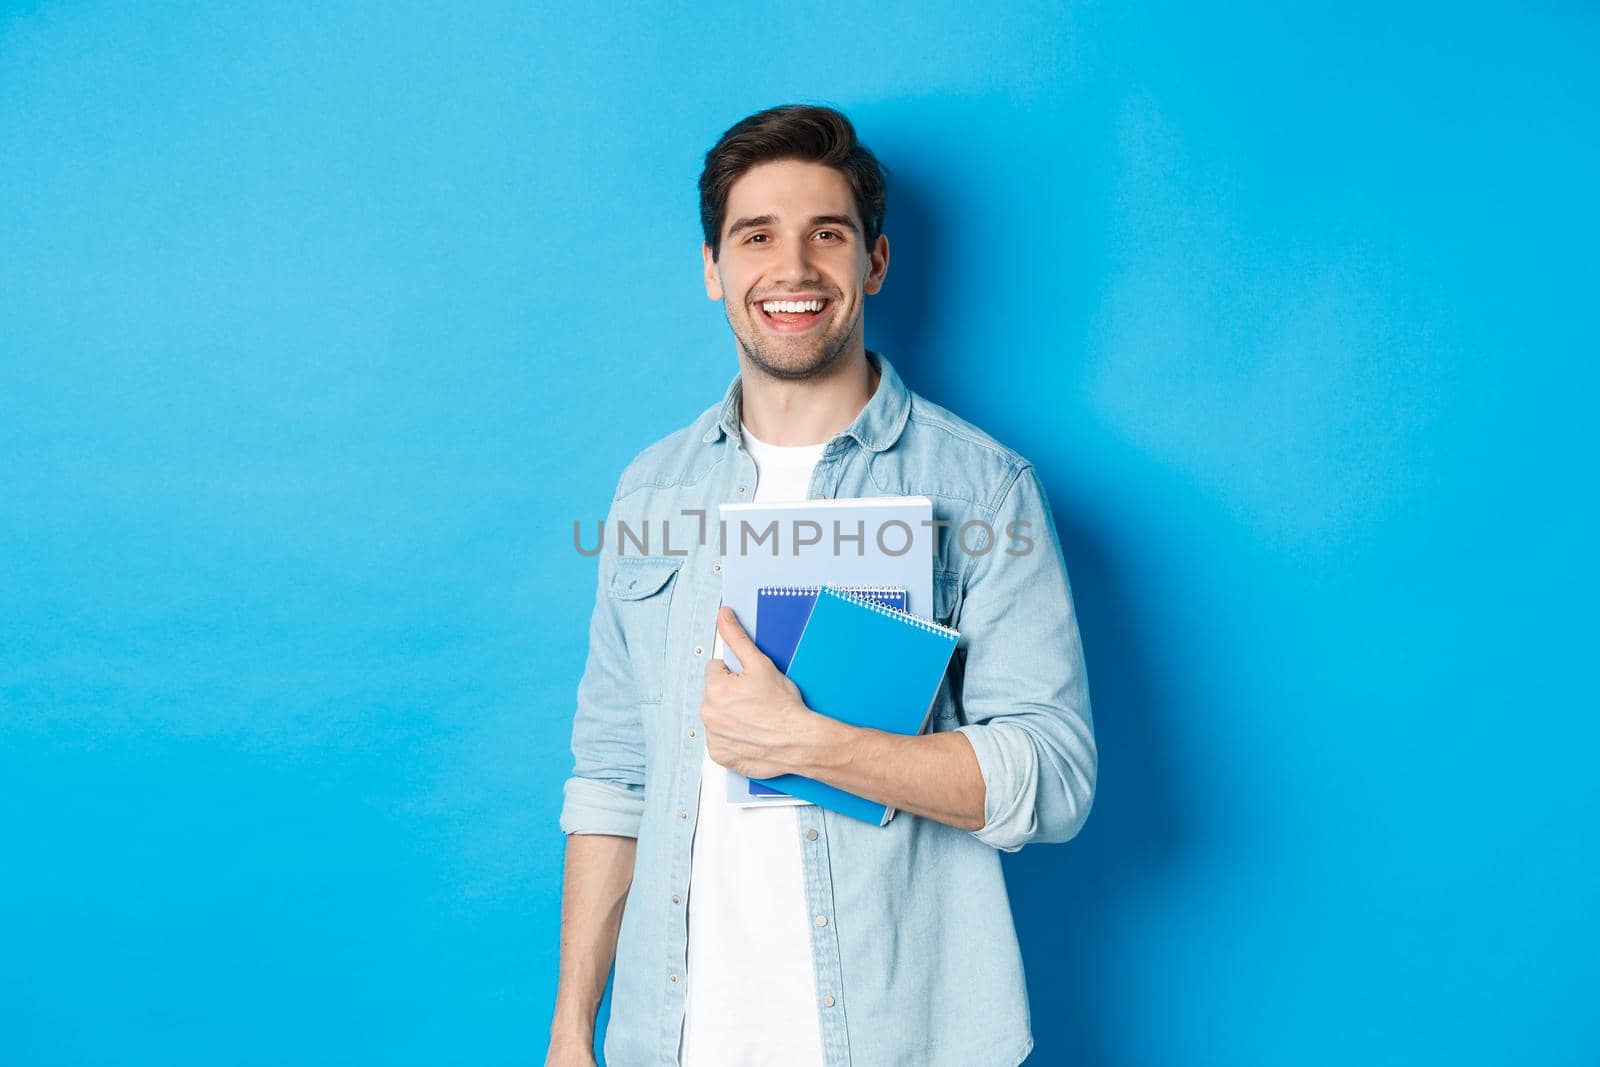 Smiling man studying, holding notebooks and looking happy, standing over blue background.